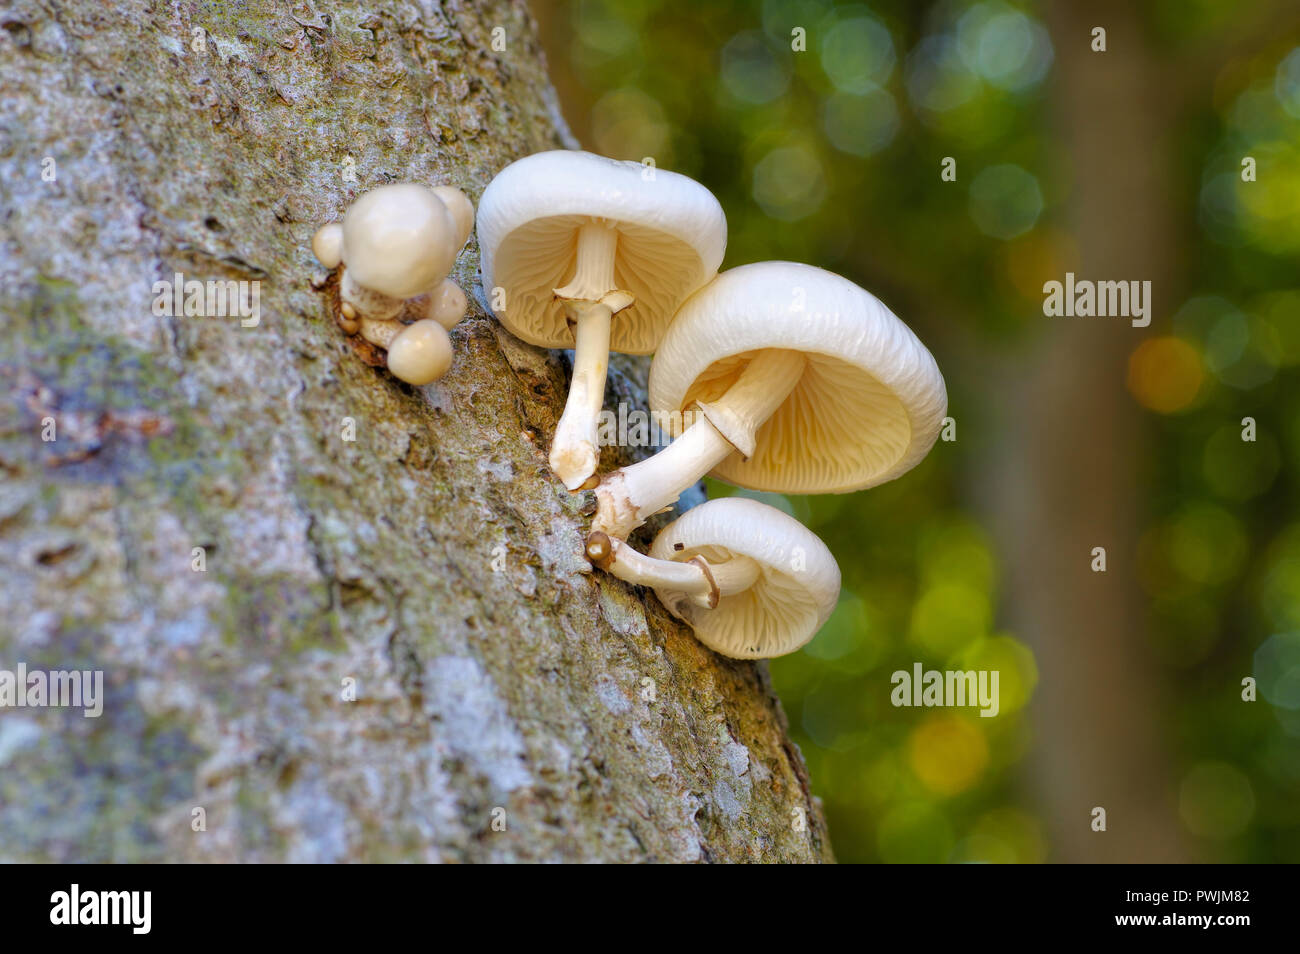 porcelain fungus or Oudemansiella mucida in autumn forest Stock Photo